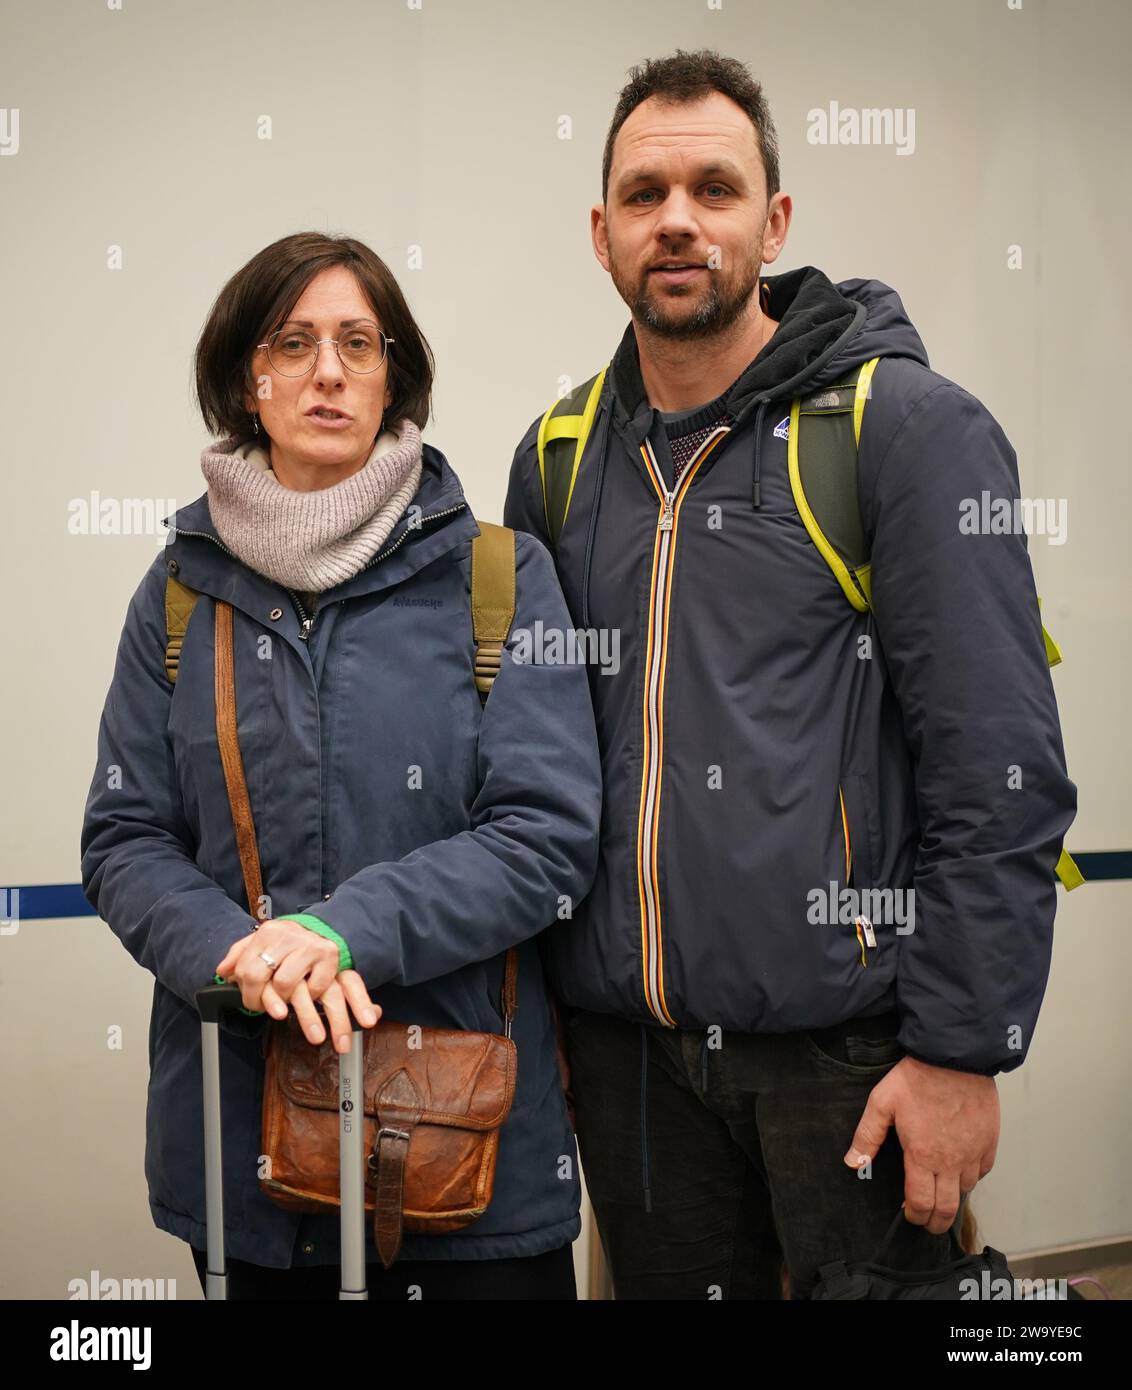 Maes Bert, 45 and her partner Lievens Nele, 45, from Brussels, who are hoping to get home to their daughter in time for New Year celebrations, waiting in line at Eurostar in St Pancras International station, central London. Eurostar have announced all of its services will resume on Sunday after flooding in tunnels under the River Thames was brought under control, although speed restrictions may lead to delays. Picture date: Sunday December 31, 2023. Stock Photo